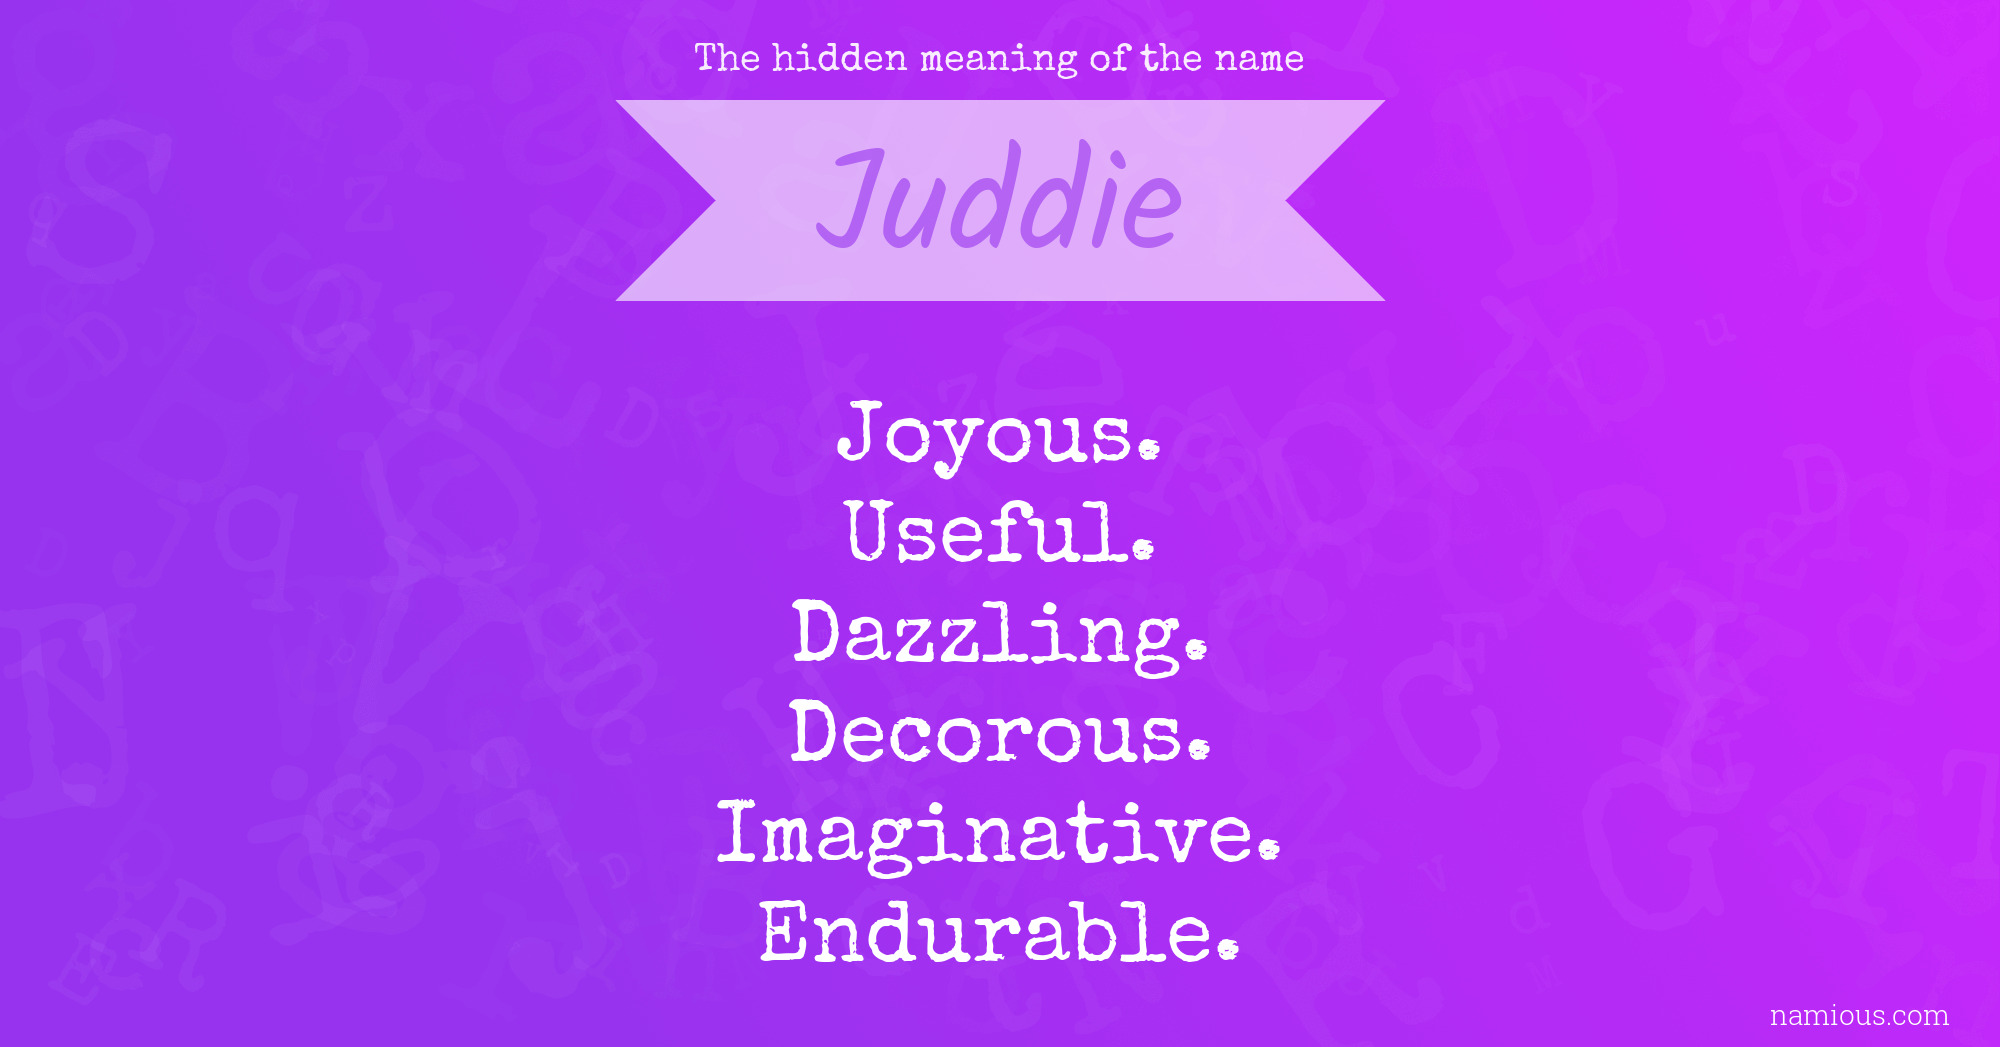 The hidden meaning of the name Juddie